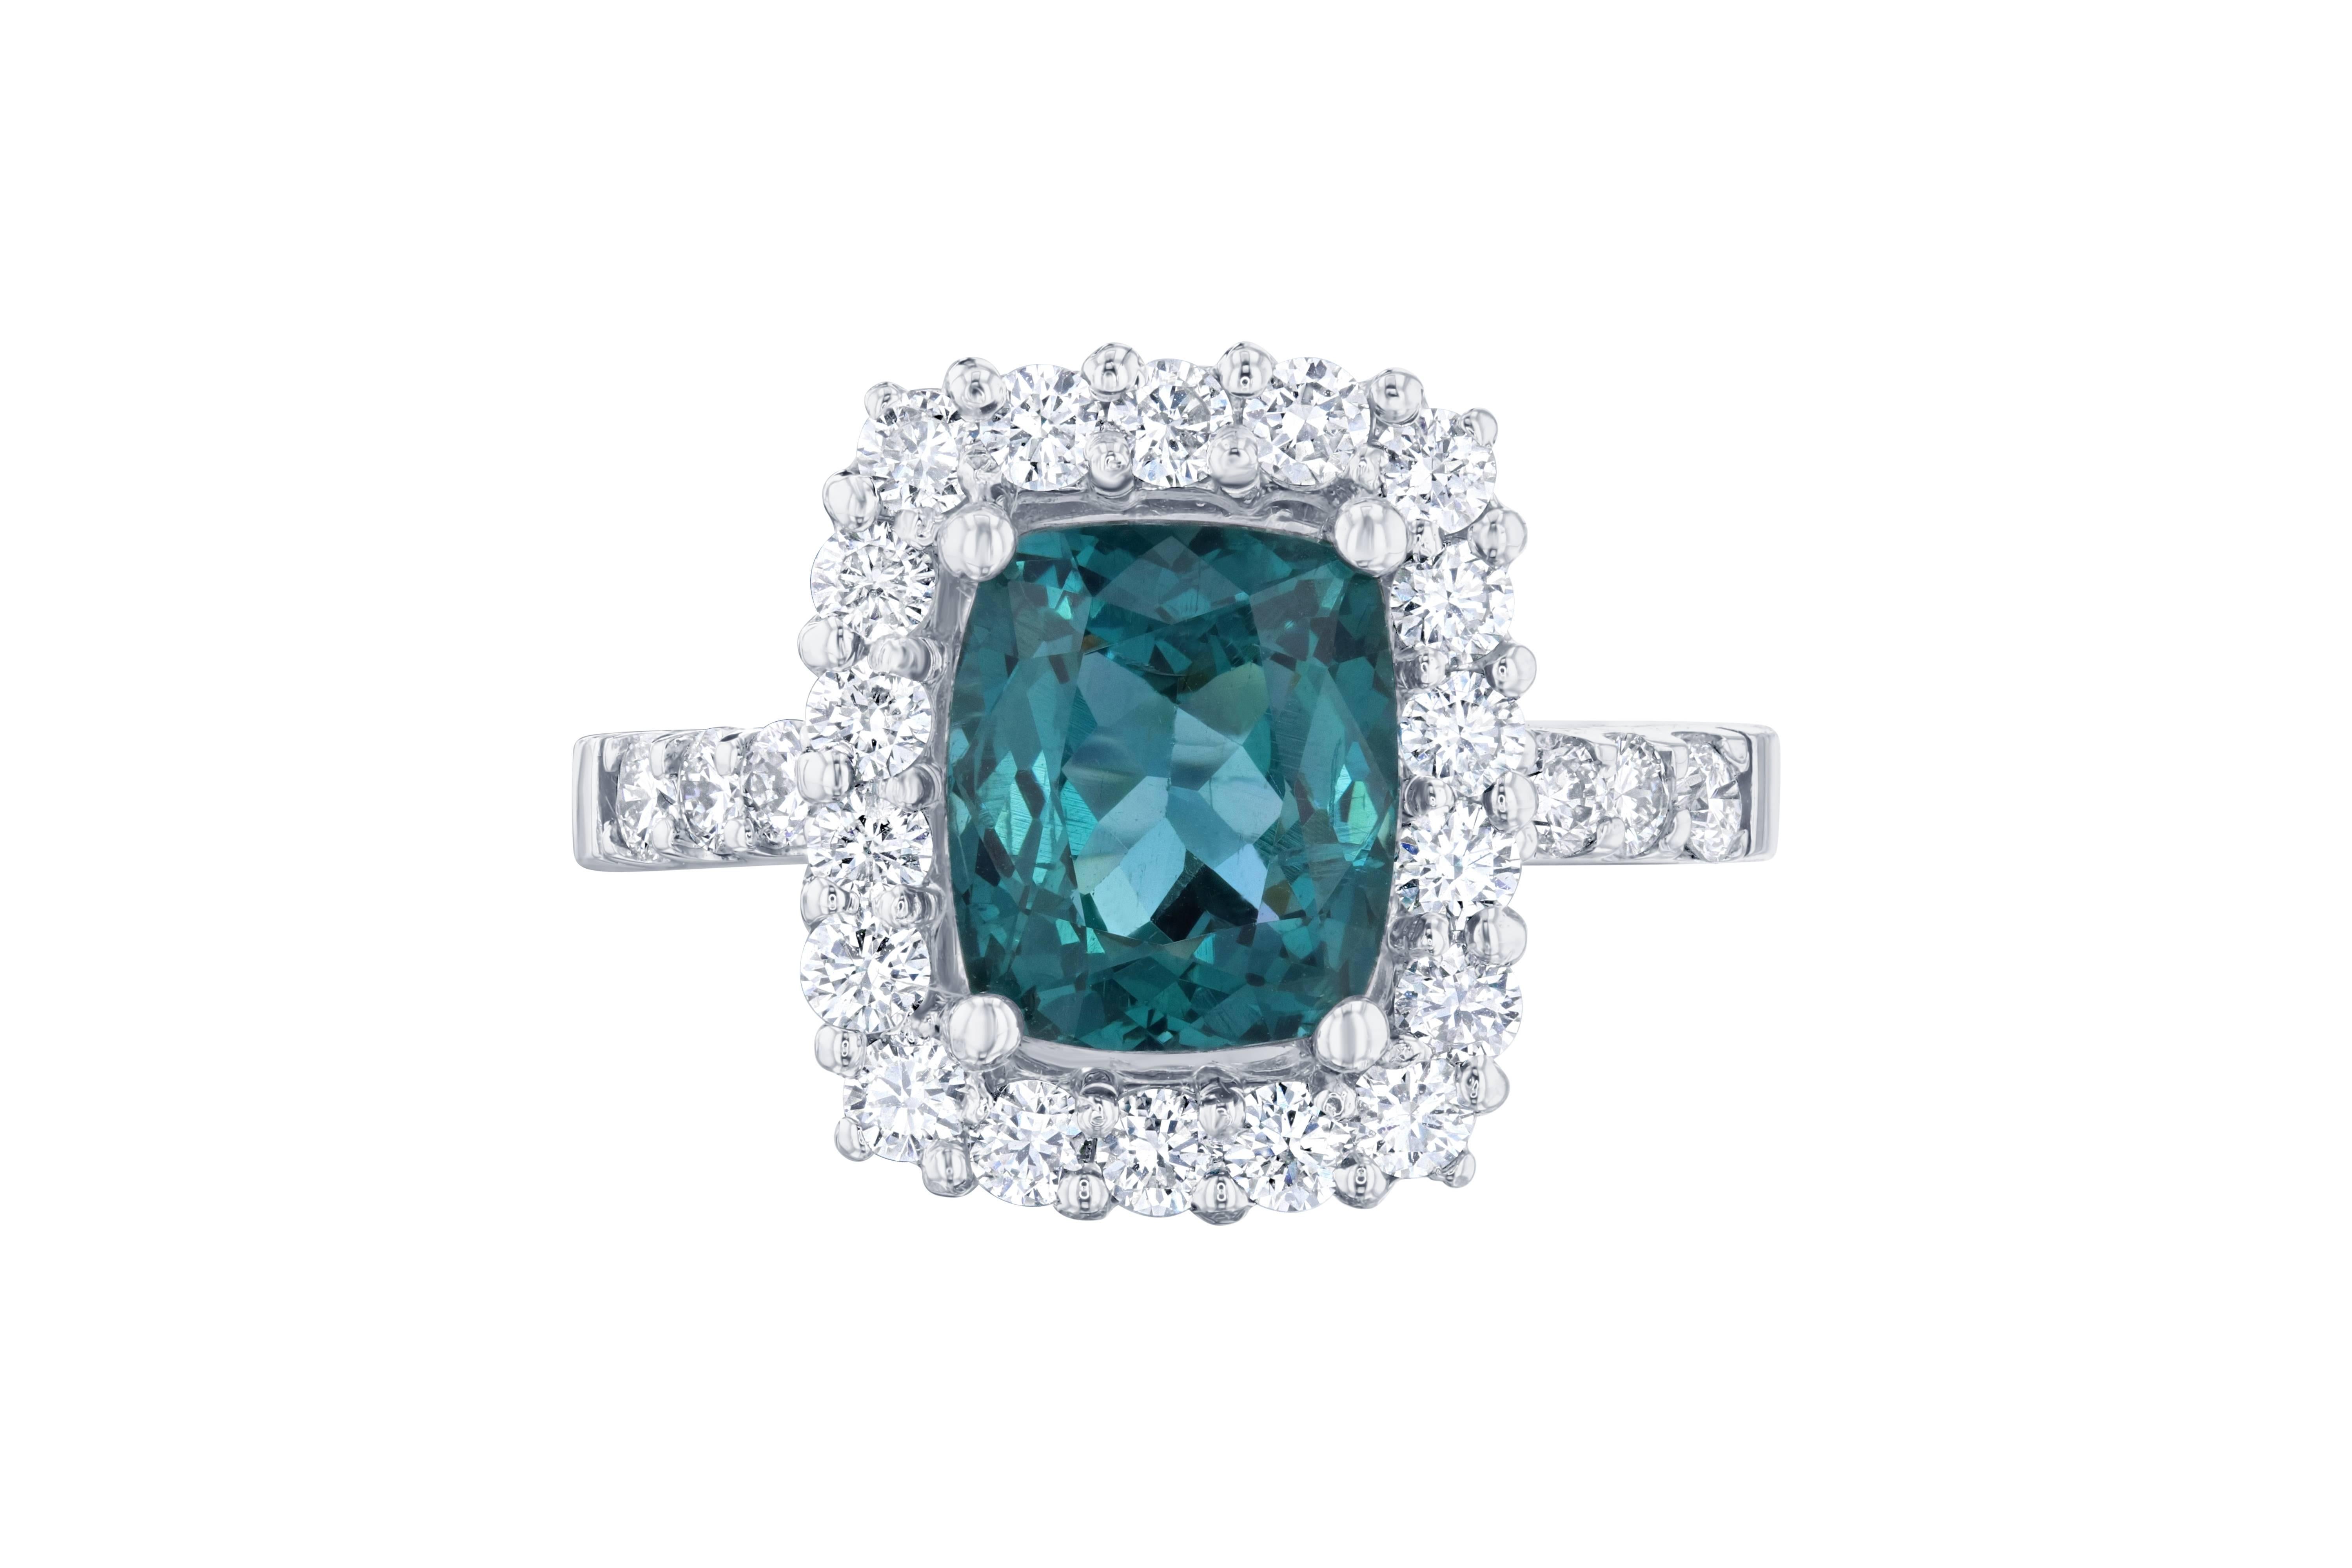 Gorgeous Halo Apatite and Diamond Ring. This ring has a 2.63 carat Apatite in the center of the ring and is surrounded by a halo of 24 Round Cut Diamonds that weigh 0.90 carat. The total carat weight of the ring is 3.53 carats.  

The ring is made